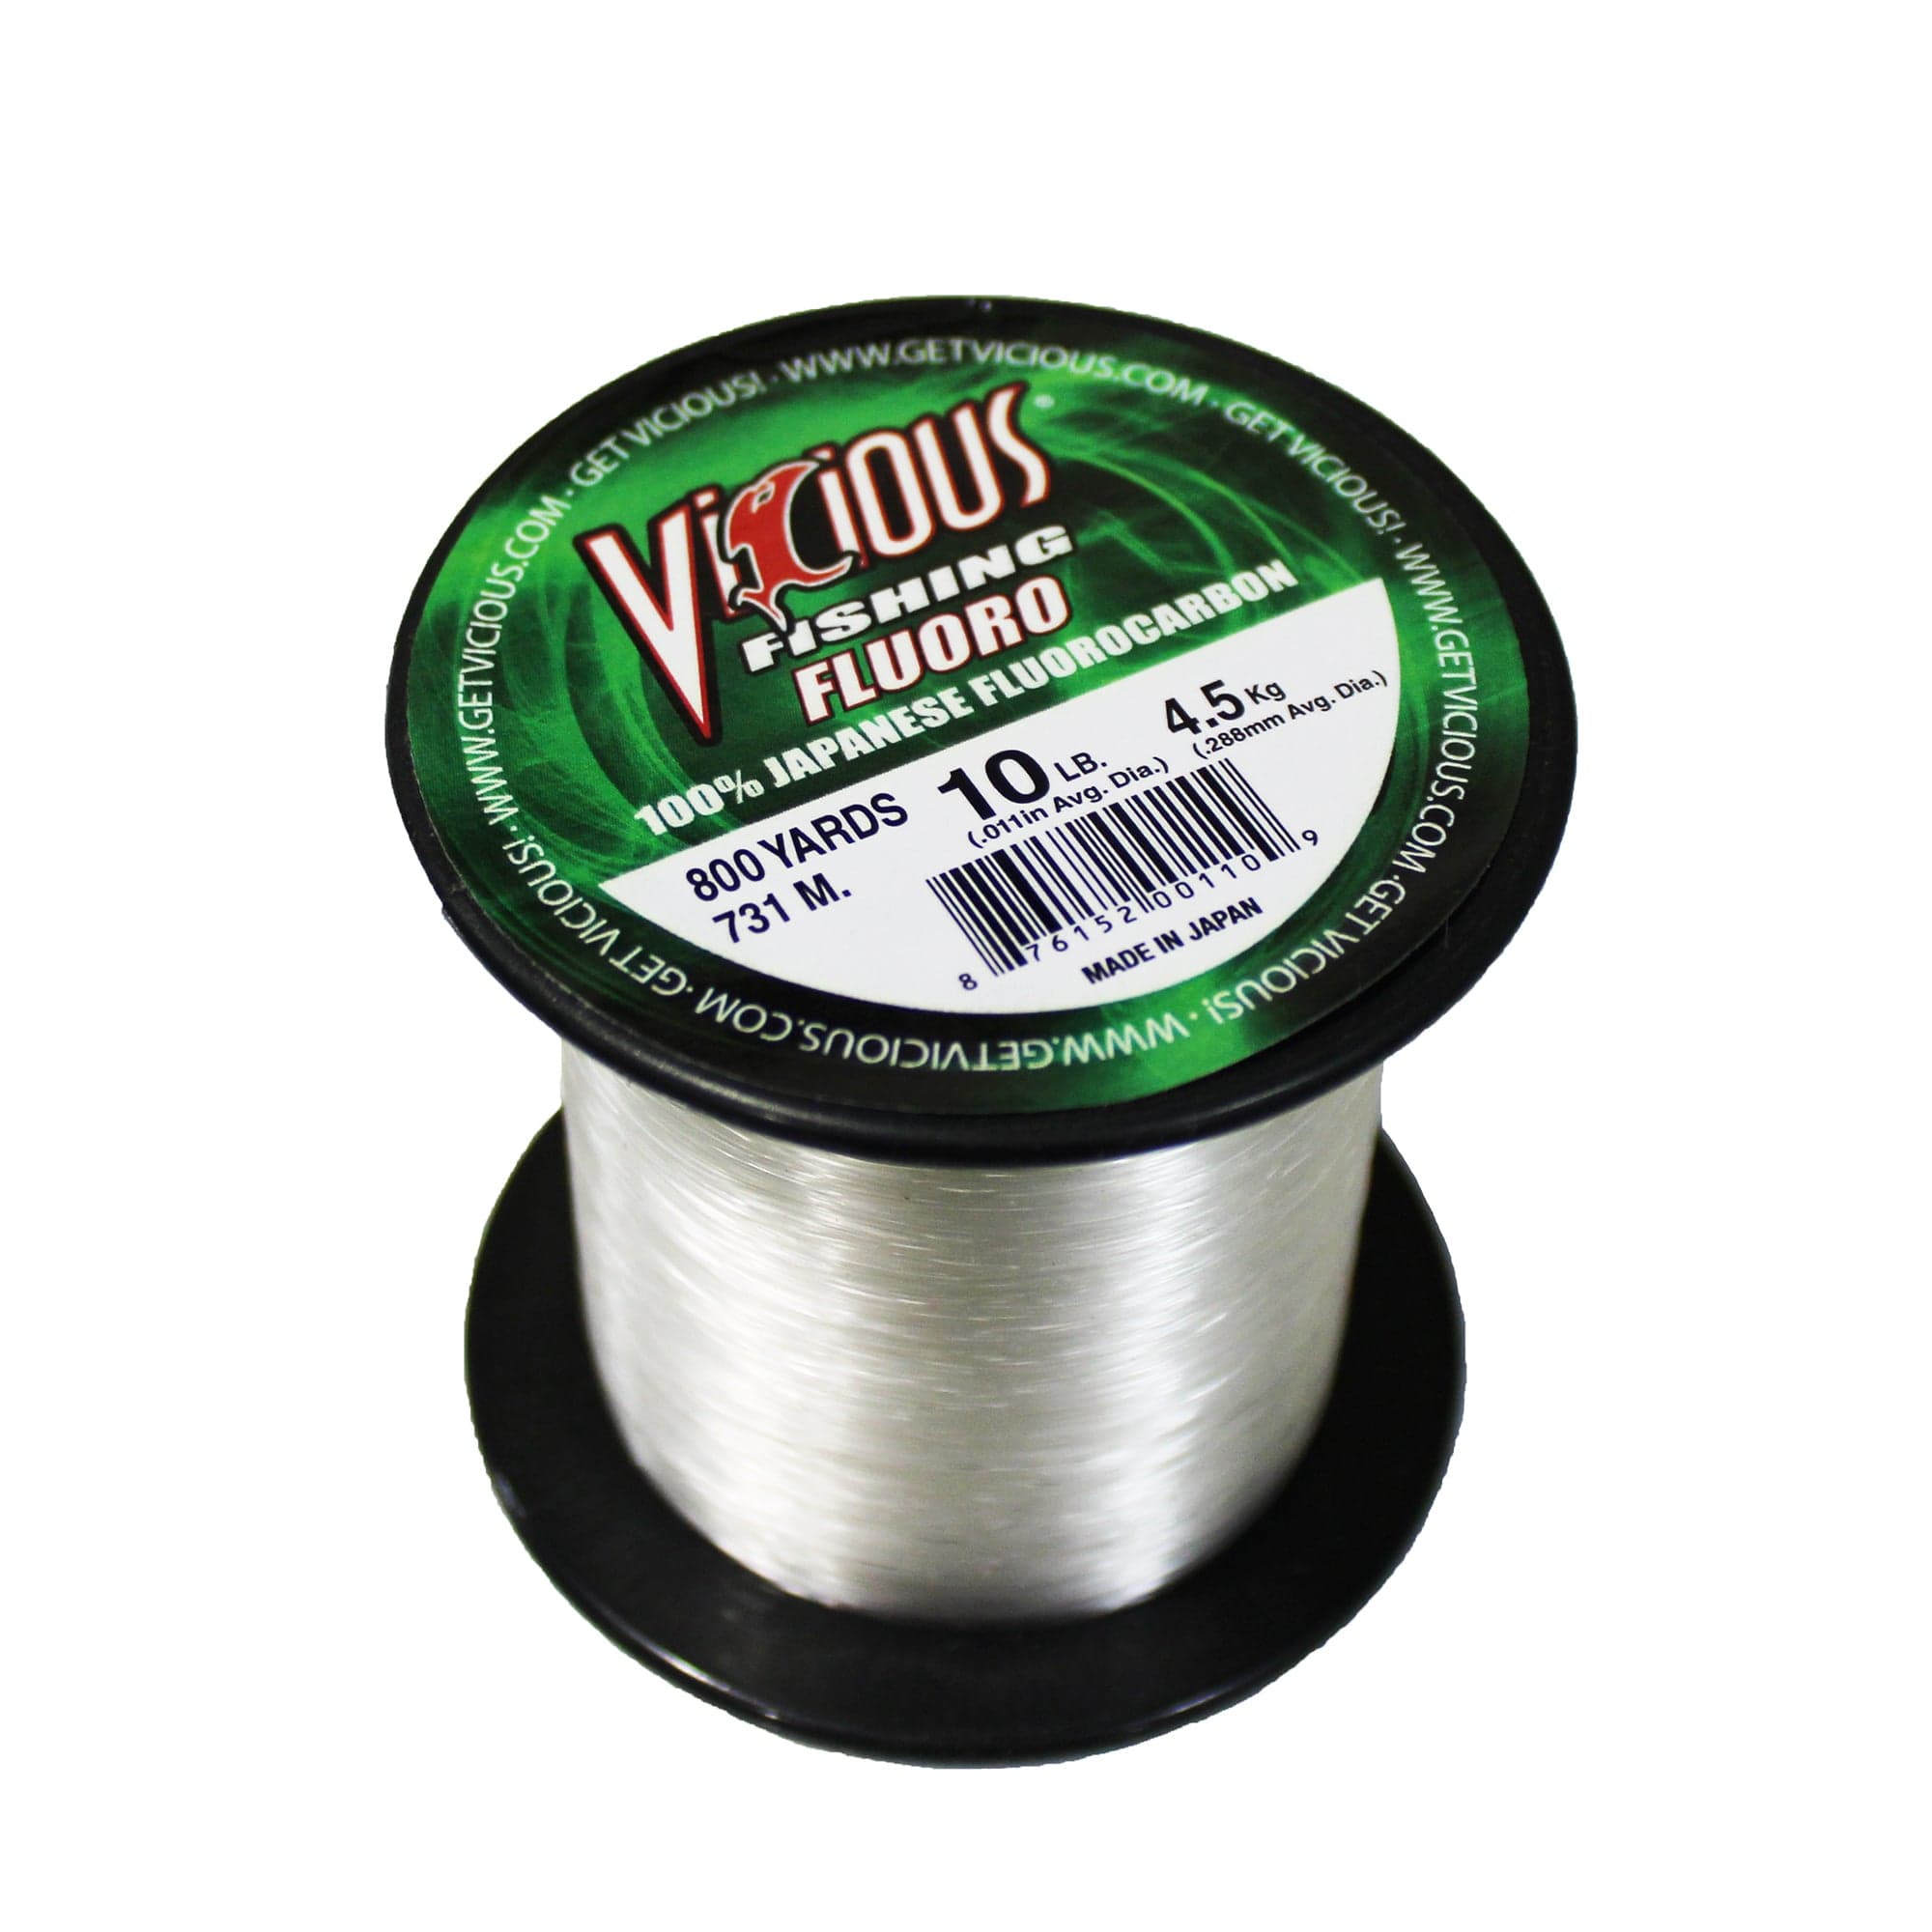 Vicious Fishing Fluoro Clear FLB 100% Fluorocarbon Fishing Line - 800 Yards